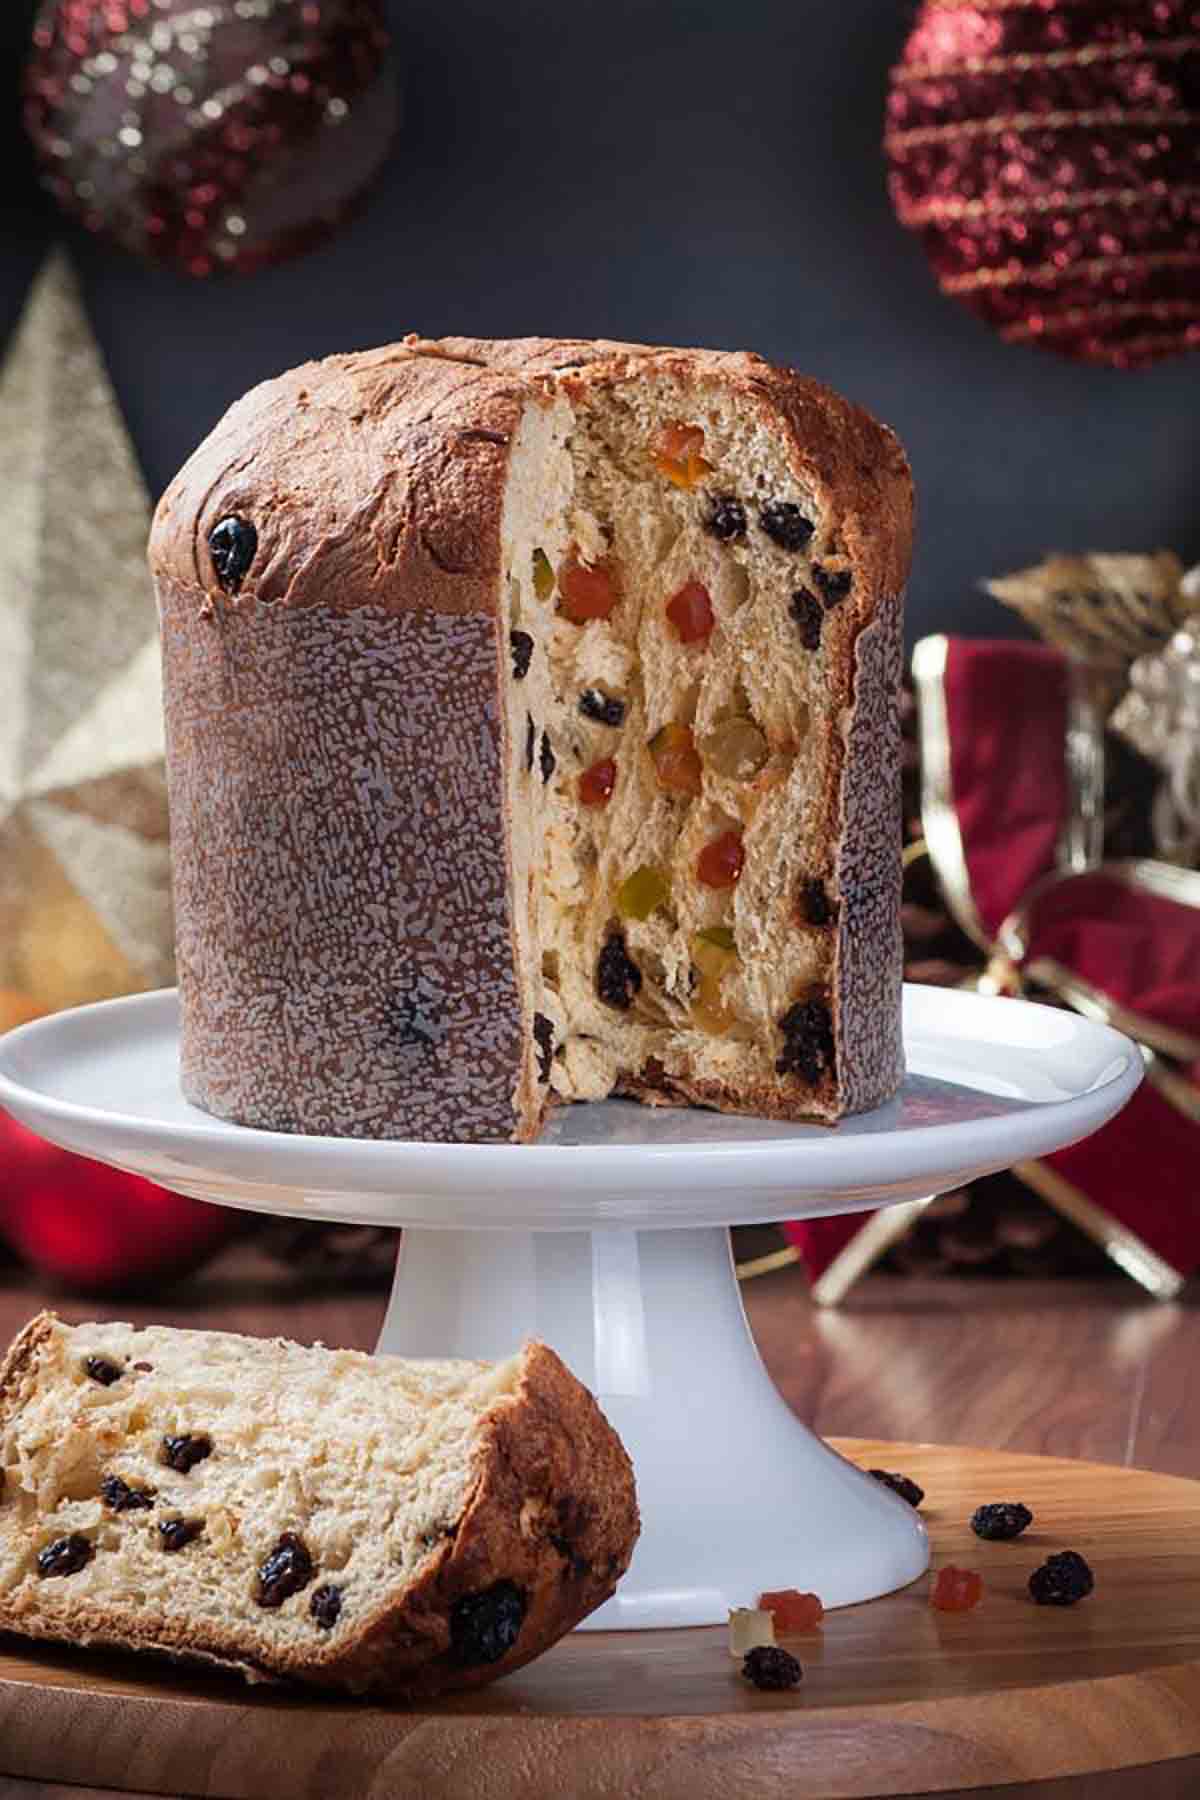 Fruity Panettone With Christmas Decor In The Background